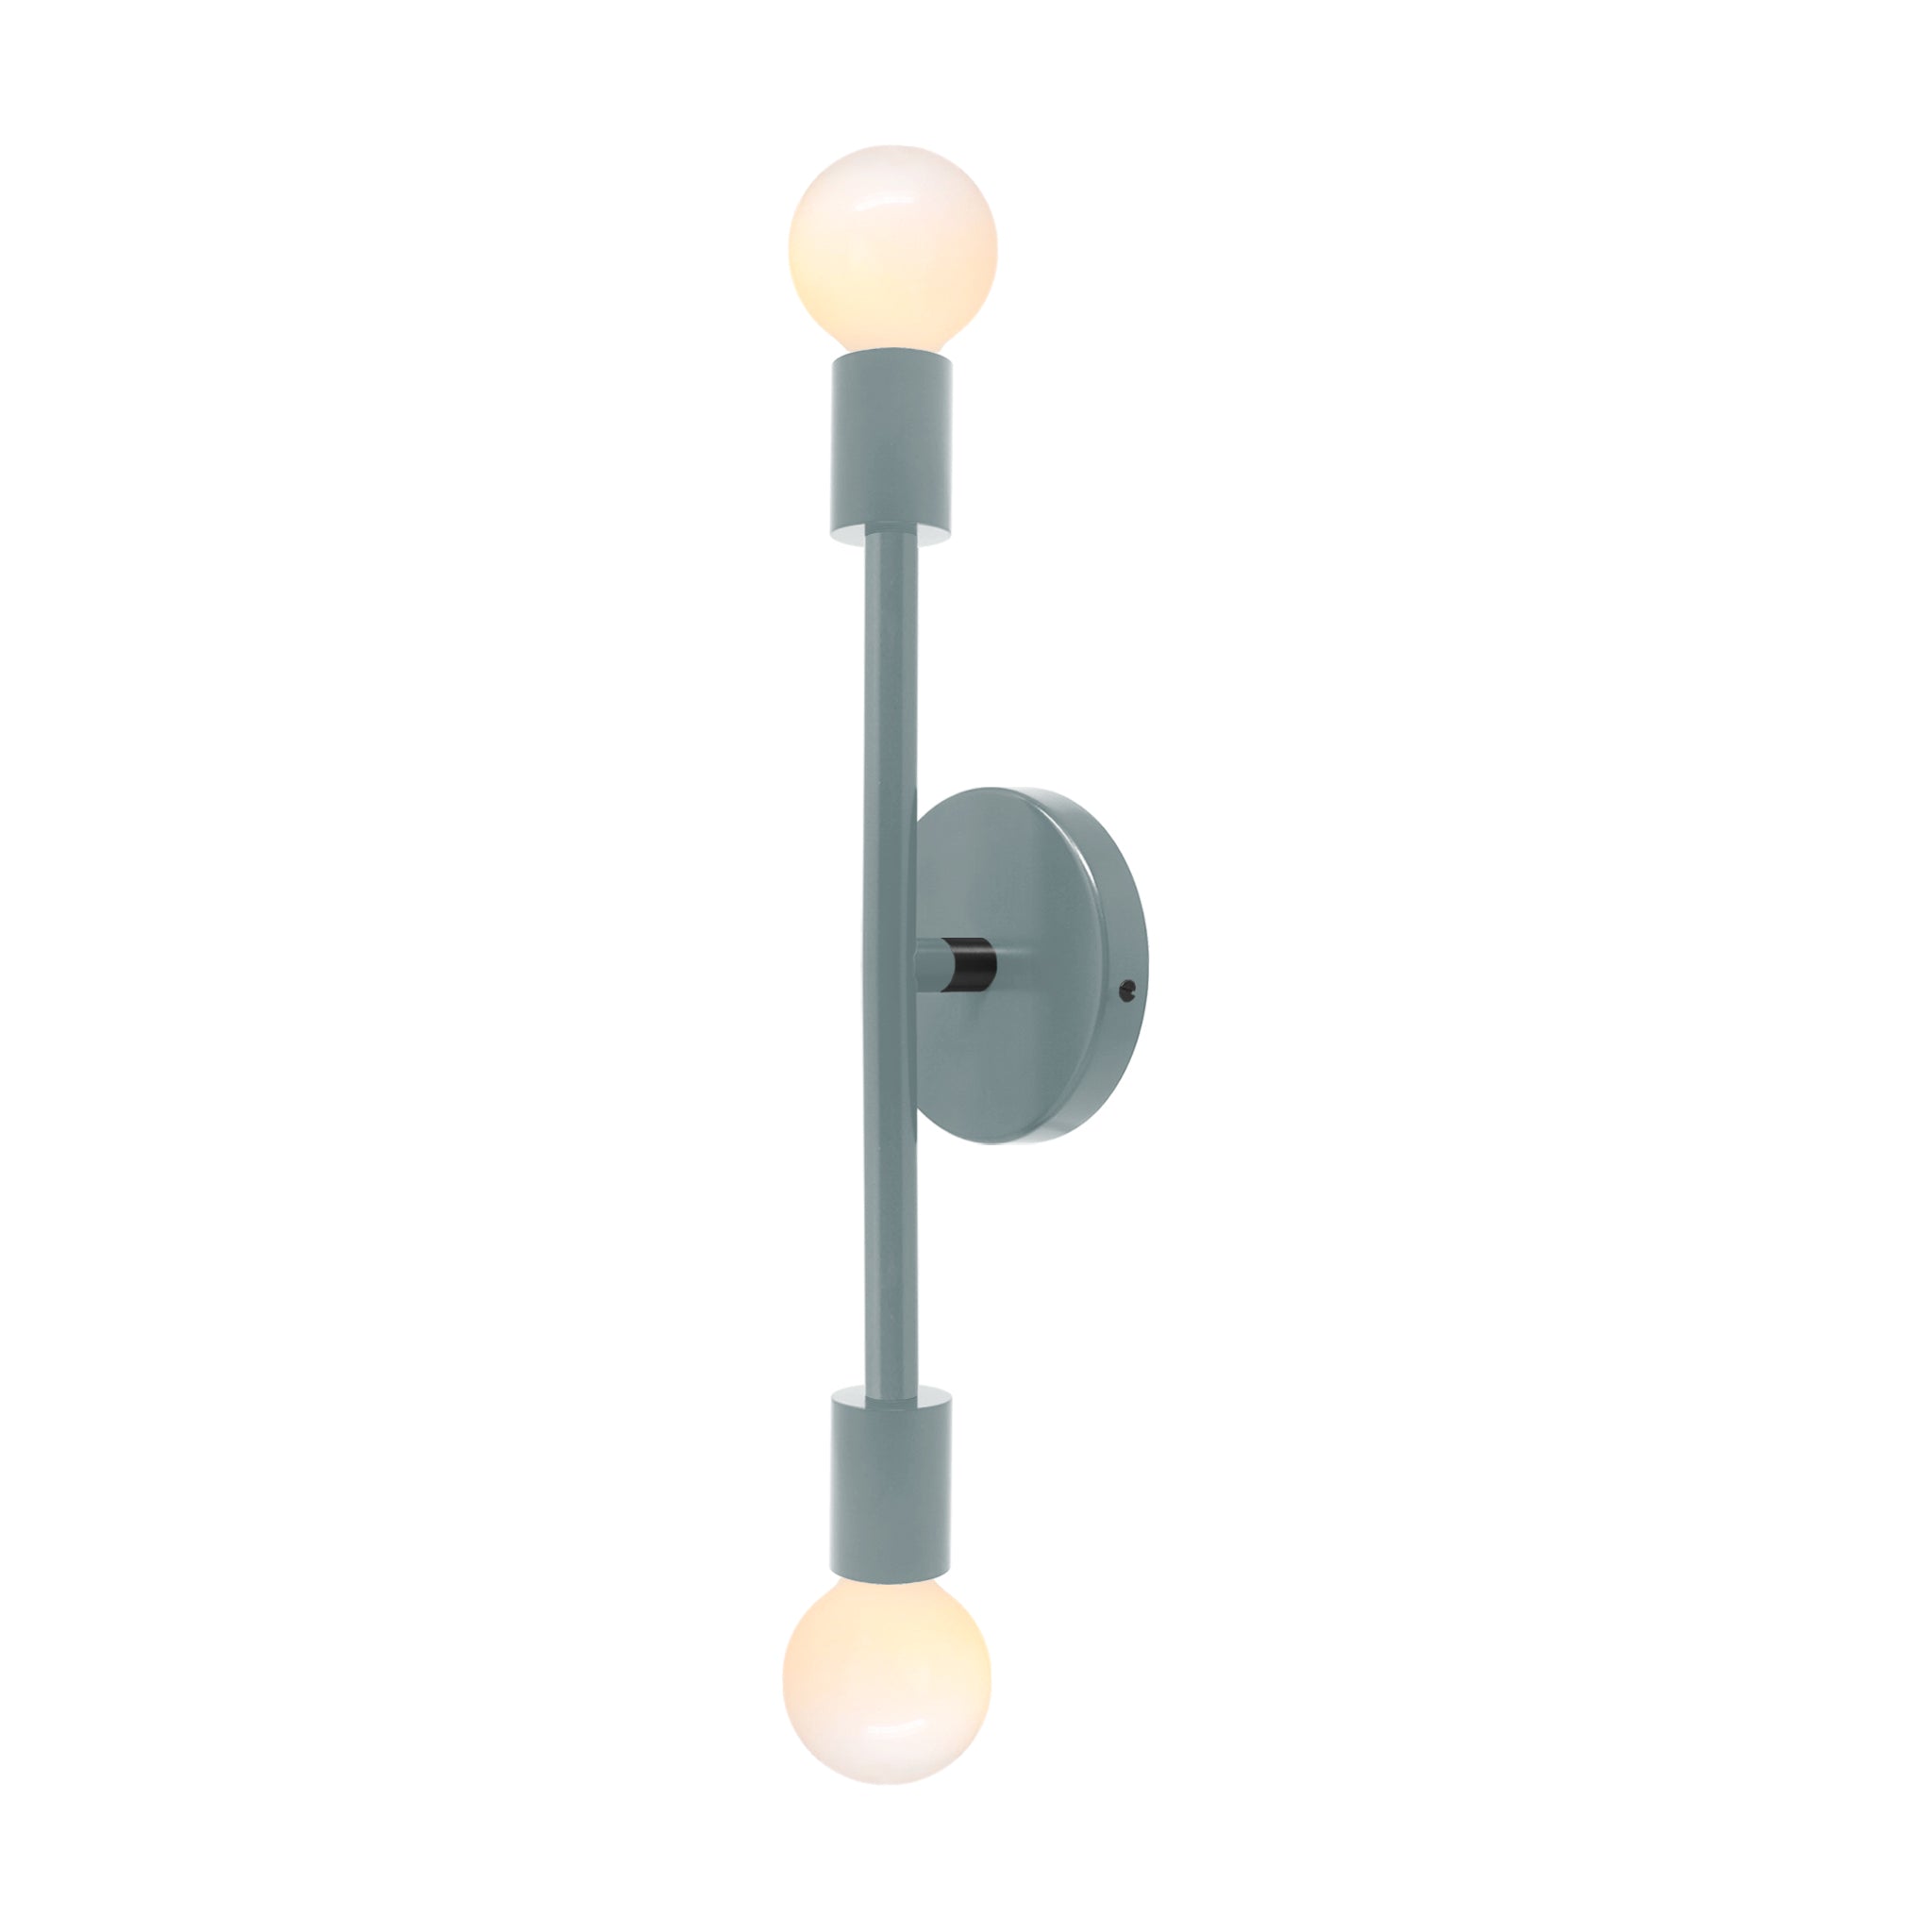 Black and lagoon color Pilot sconce 17" Dutton Brown lighting